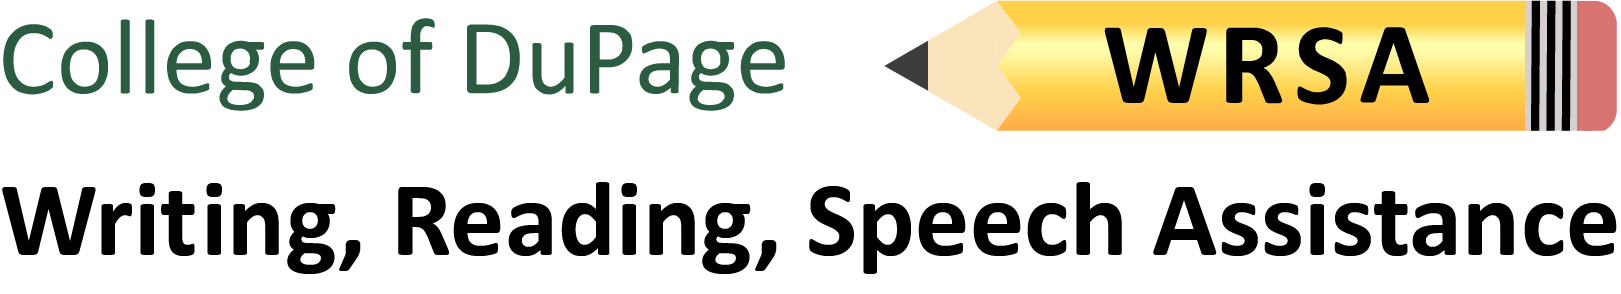 College of DuPage Writing, Reading, Speech Assistance (WRSA) Logo